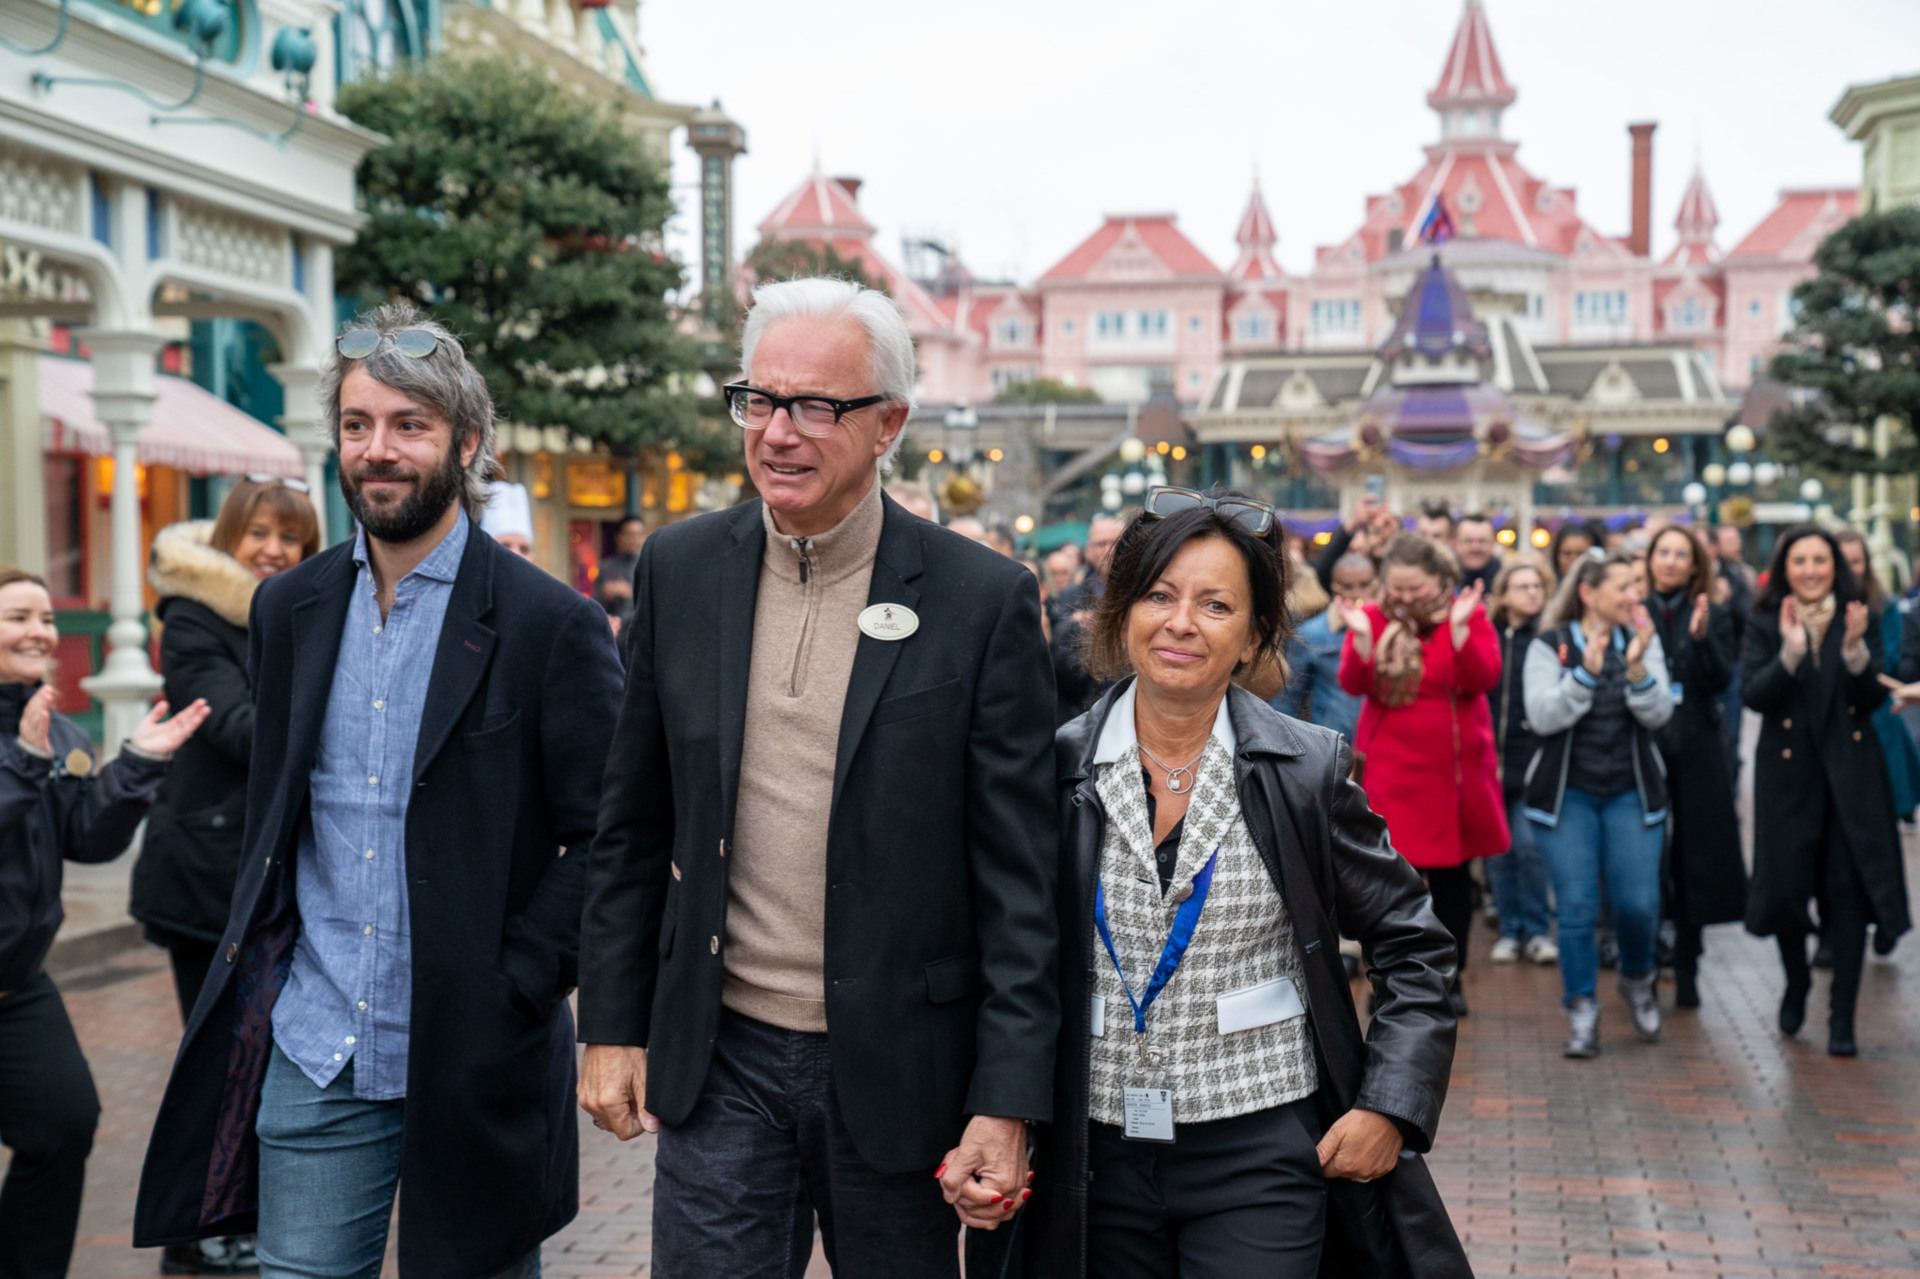 A visually emotional Daniel Delcourt is welcomed by Cast Members on Main Street.